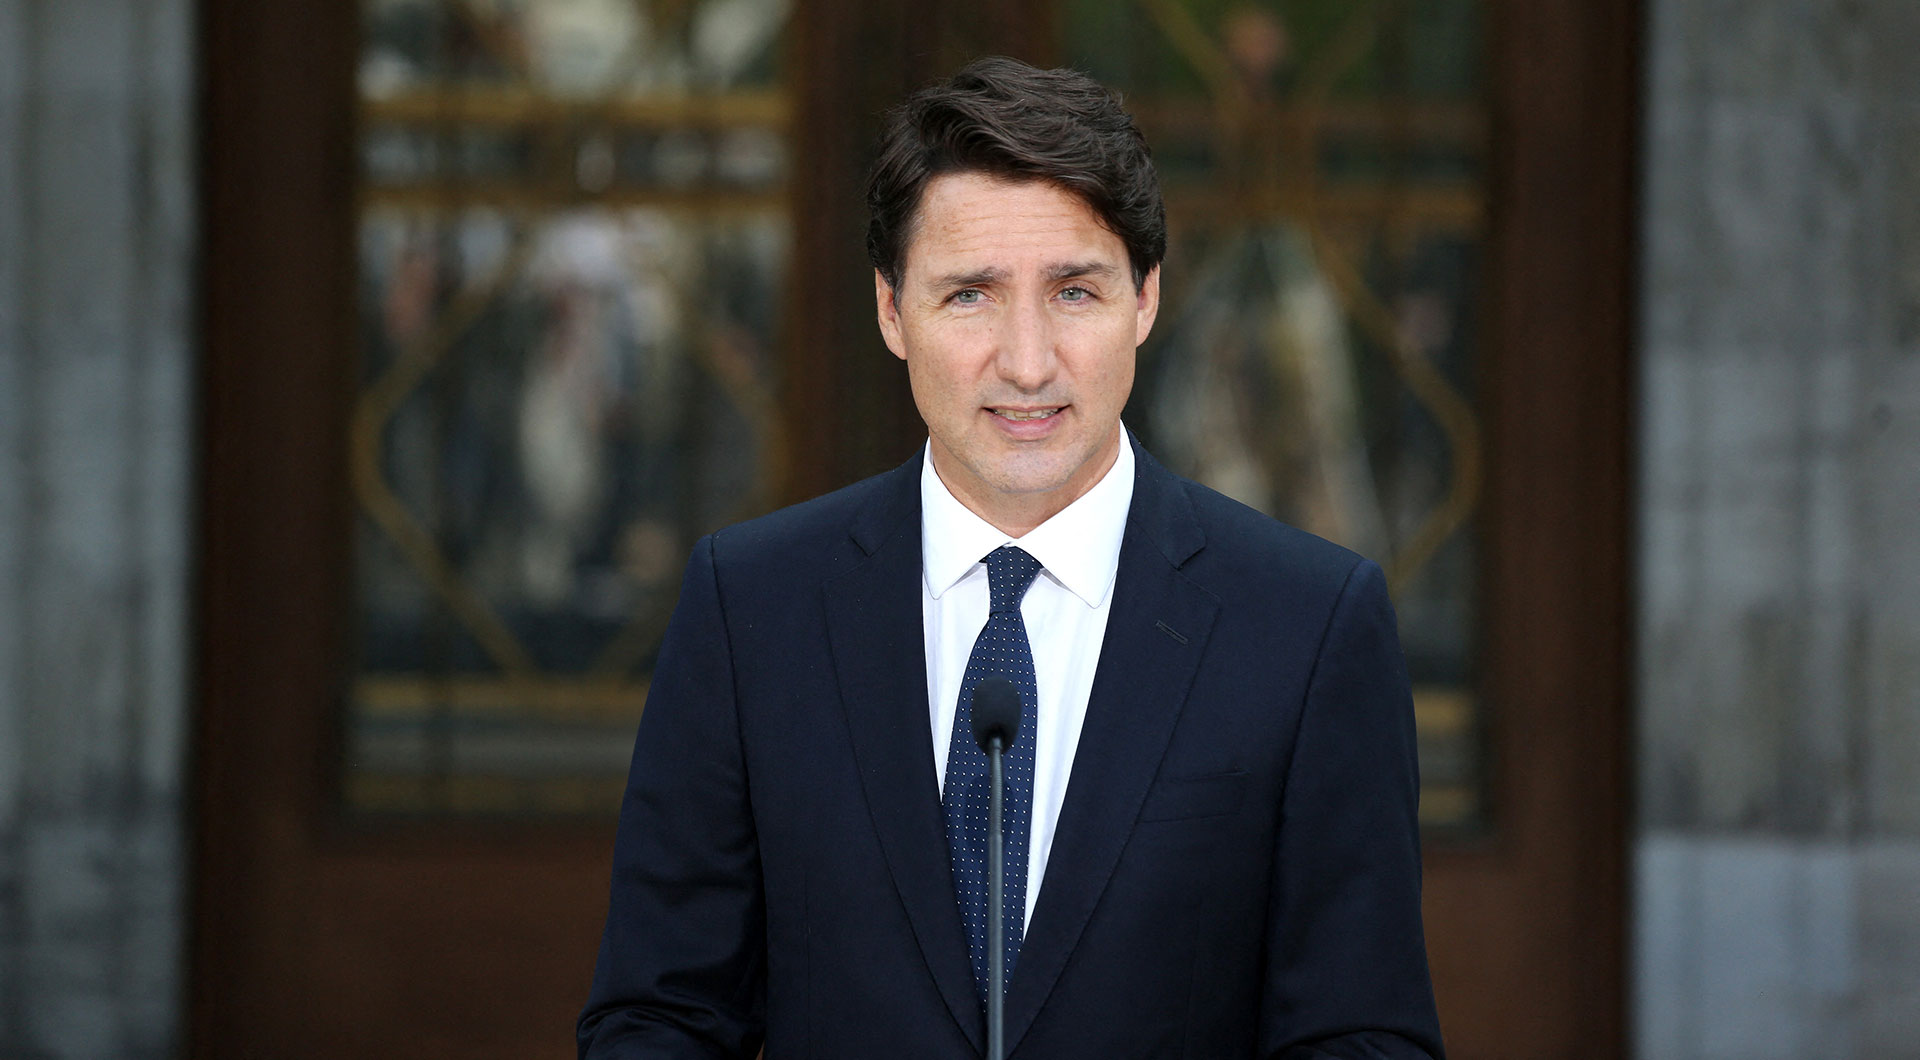 Prime Minister Justin Trudeau announces snap election on September 20